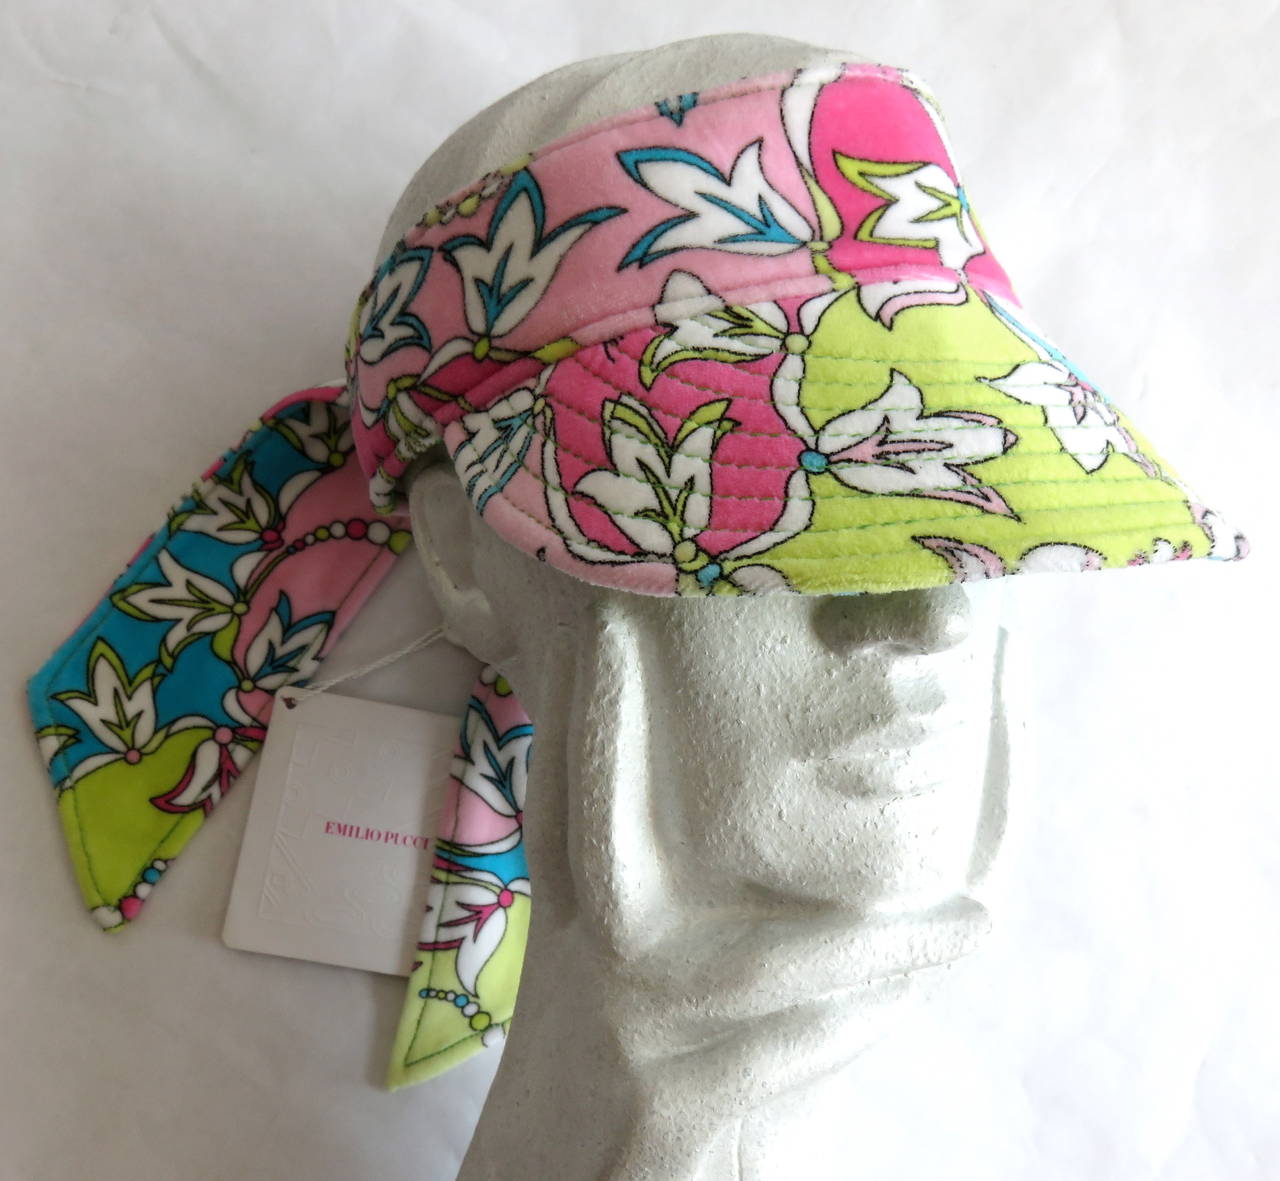 EMILIO PUCCI Beach visor & tote bag set.

The visor was never worn, and still has the original tags on it.  The matching tote bag has no signs of wear on the outside, but has some light signs of use on the inside.

The visor is made of plush